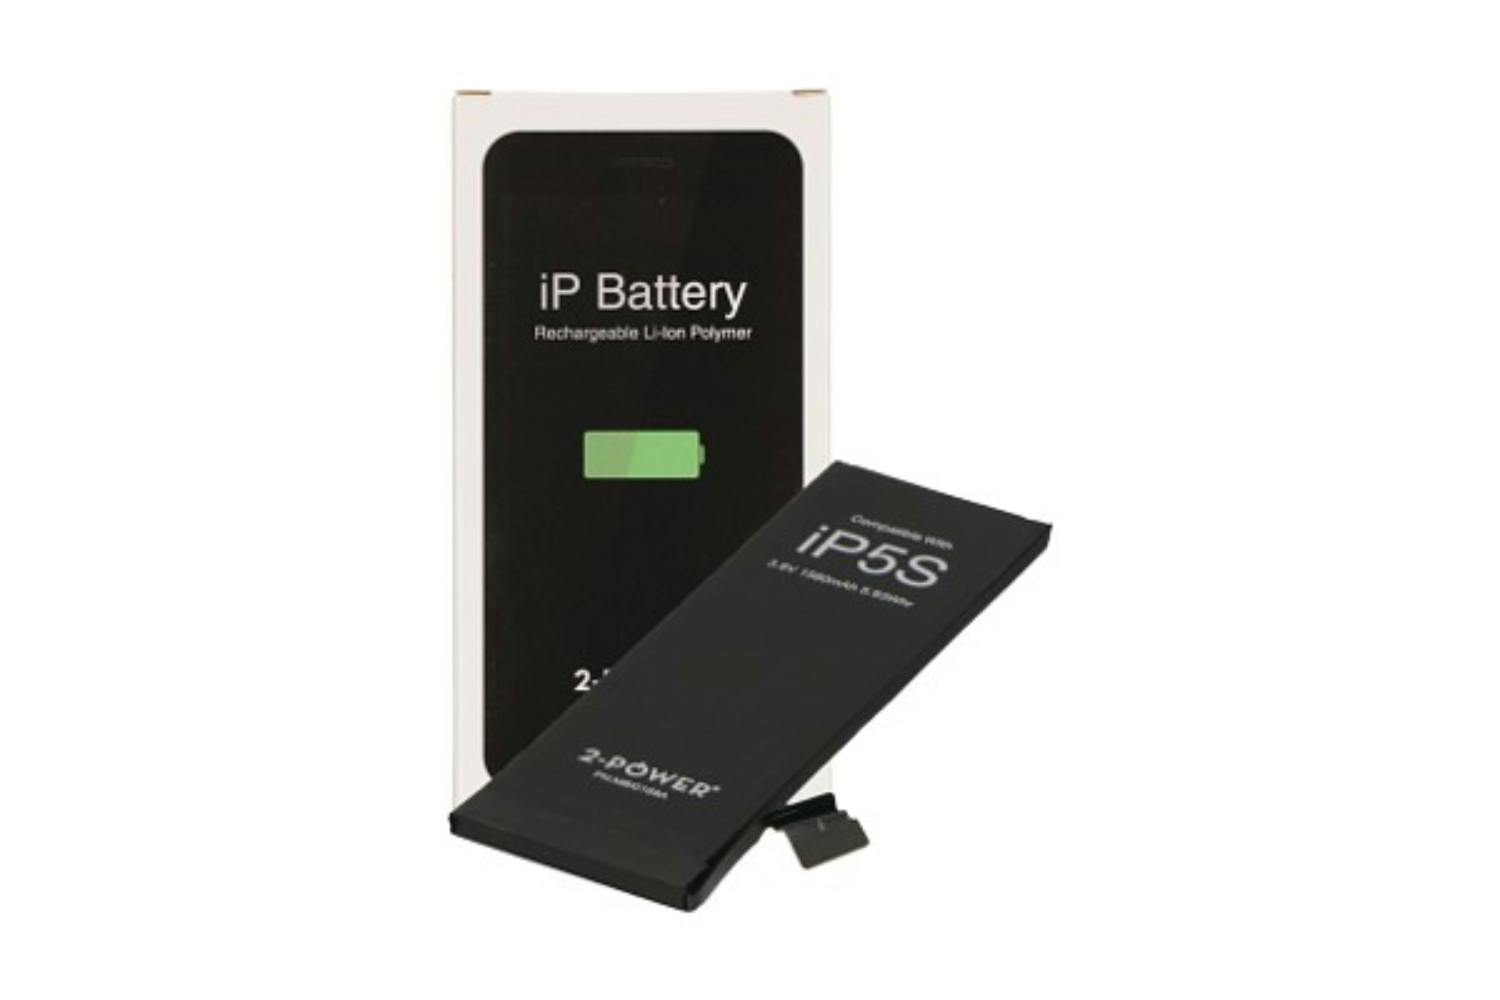 2-Power MBI0169AW 1560mAh Replacement iPhone Battery